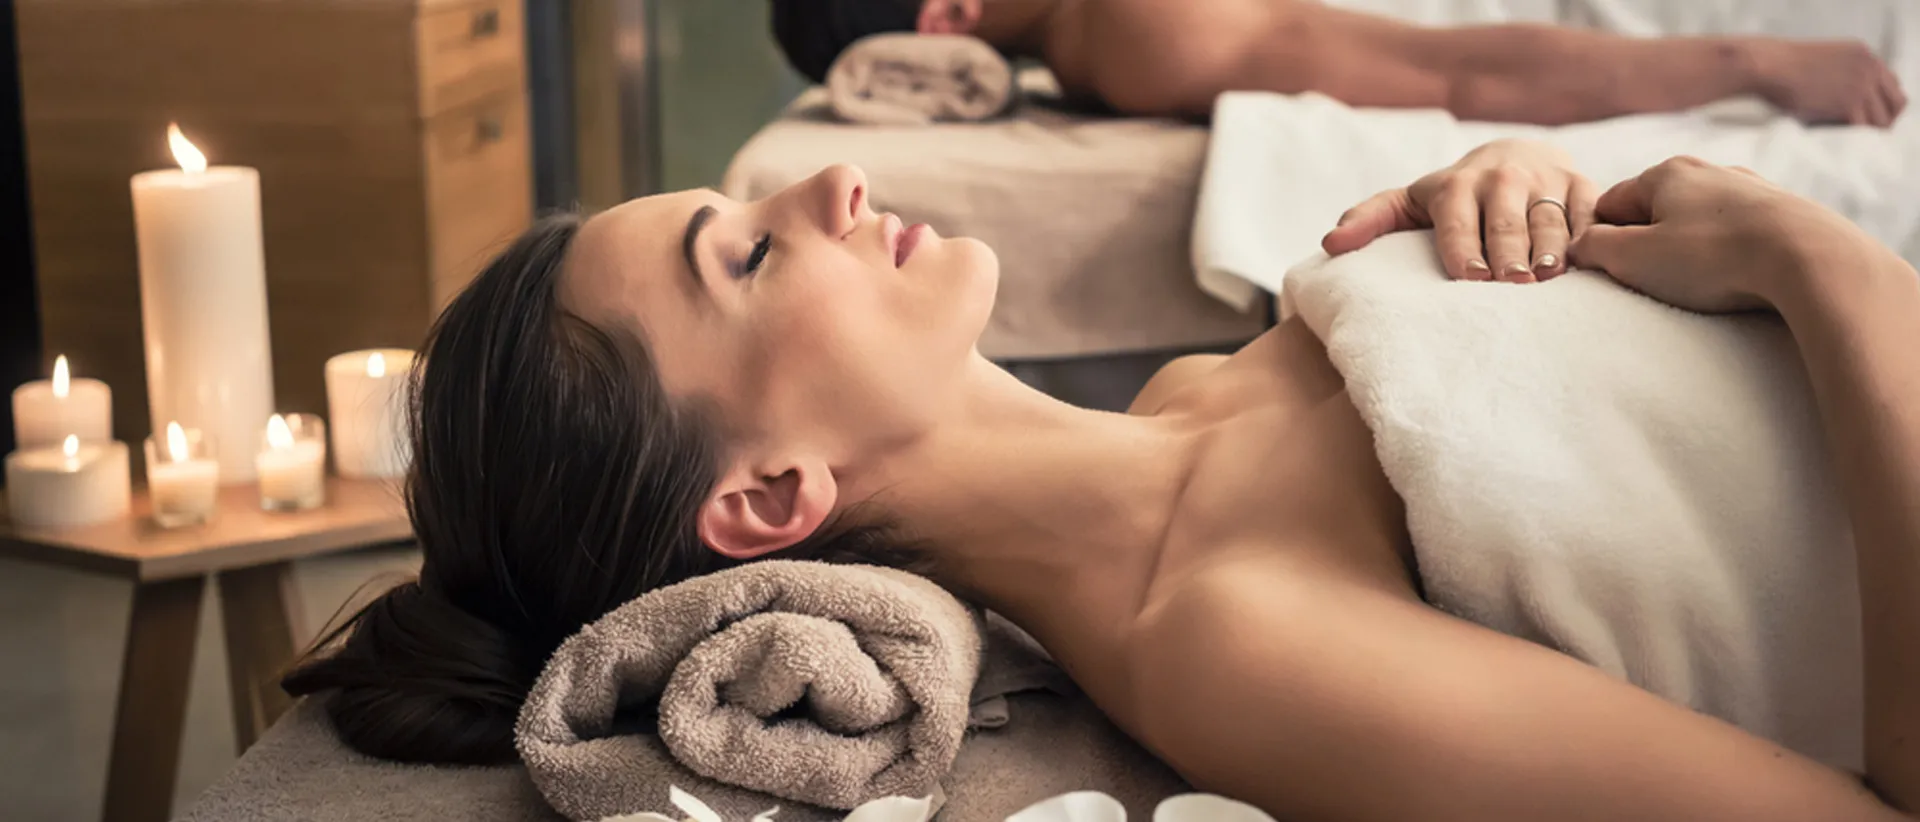 Woman relaxing at a massage spa with candles in the background.
